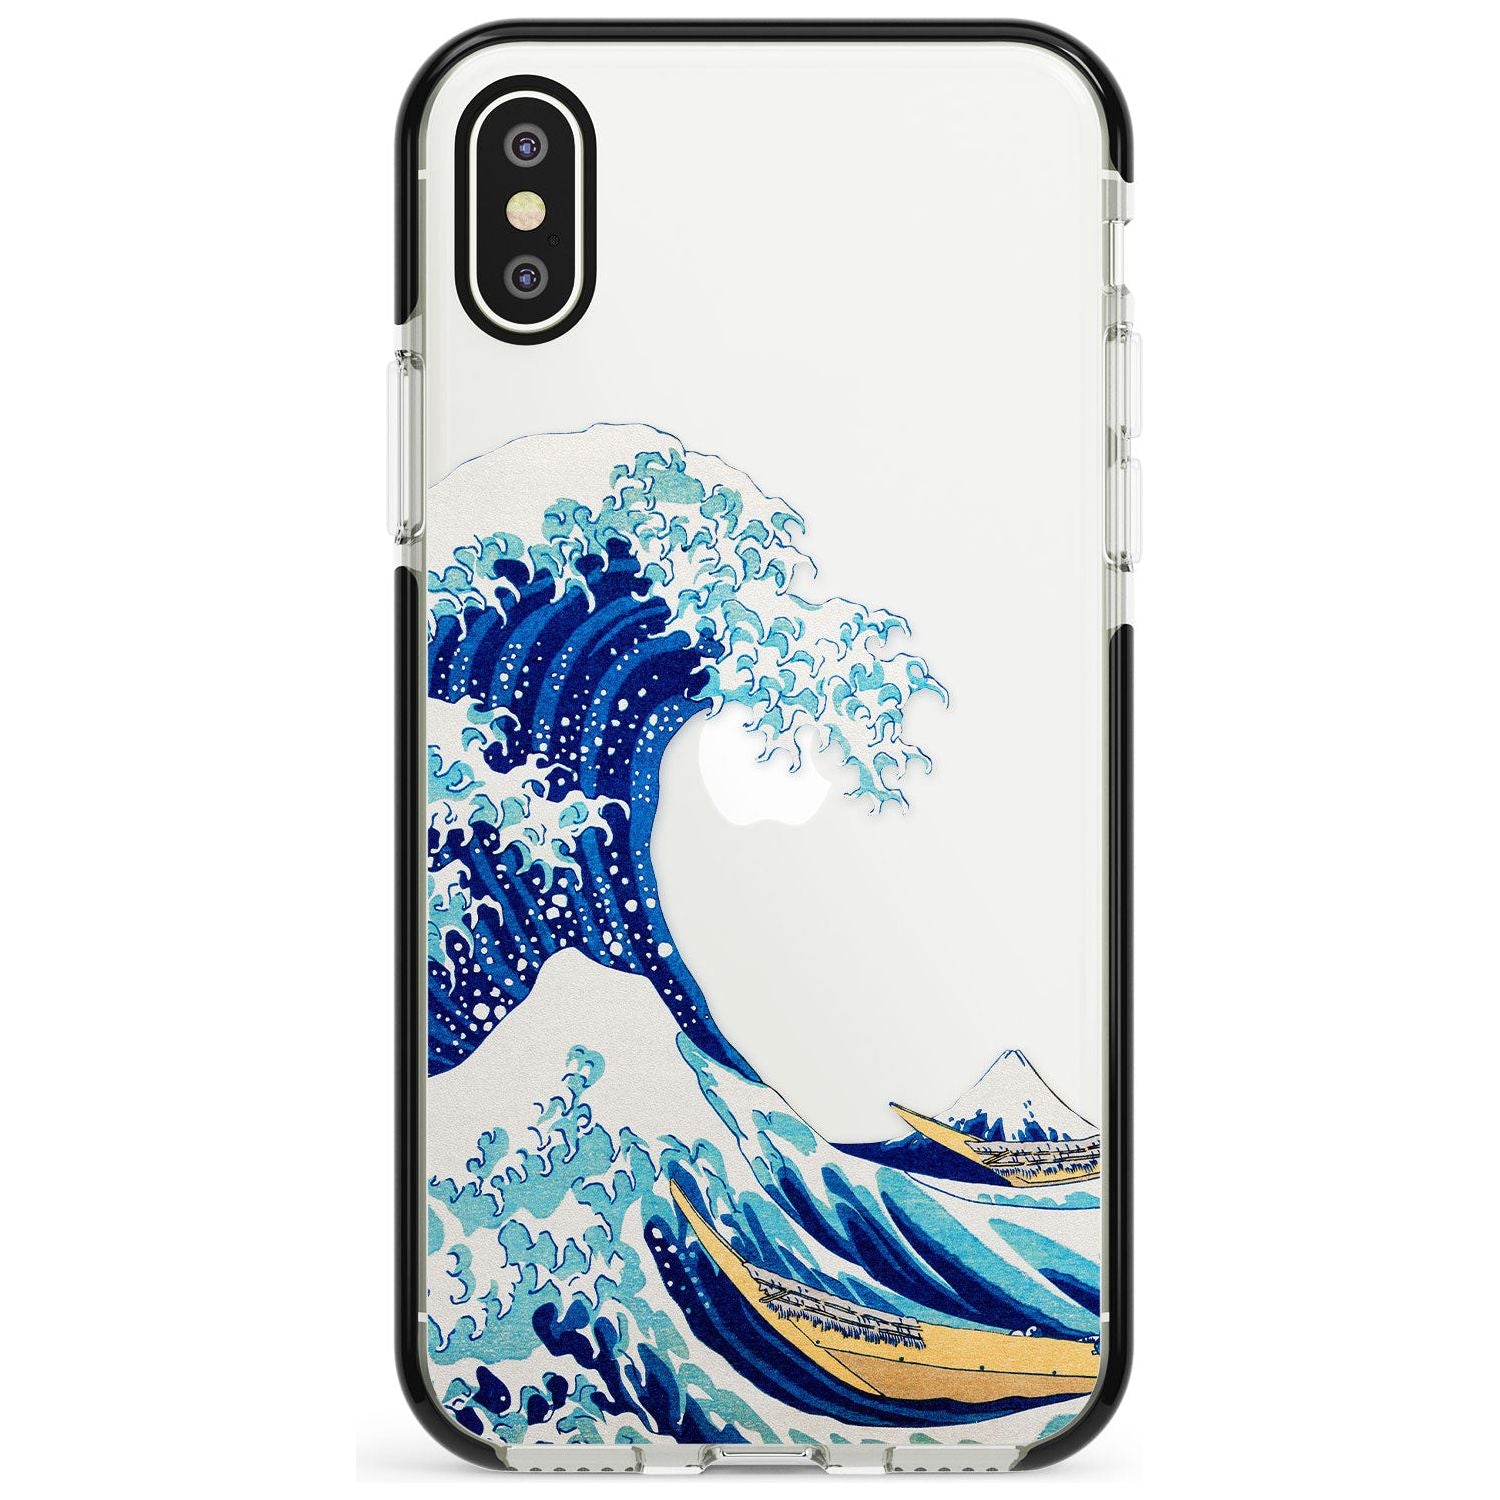 Sidewall Phone Case for iPhone X XS Max XR